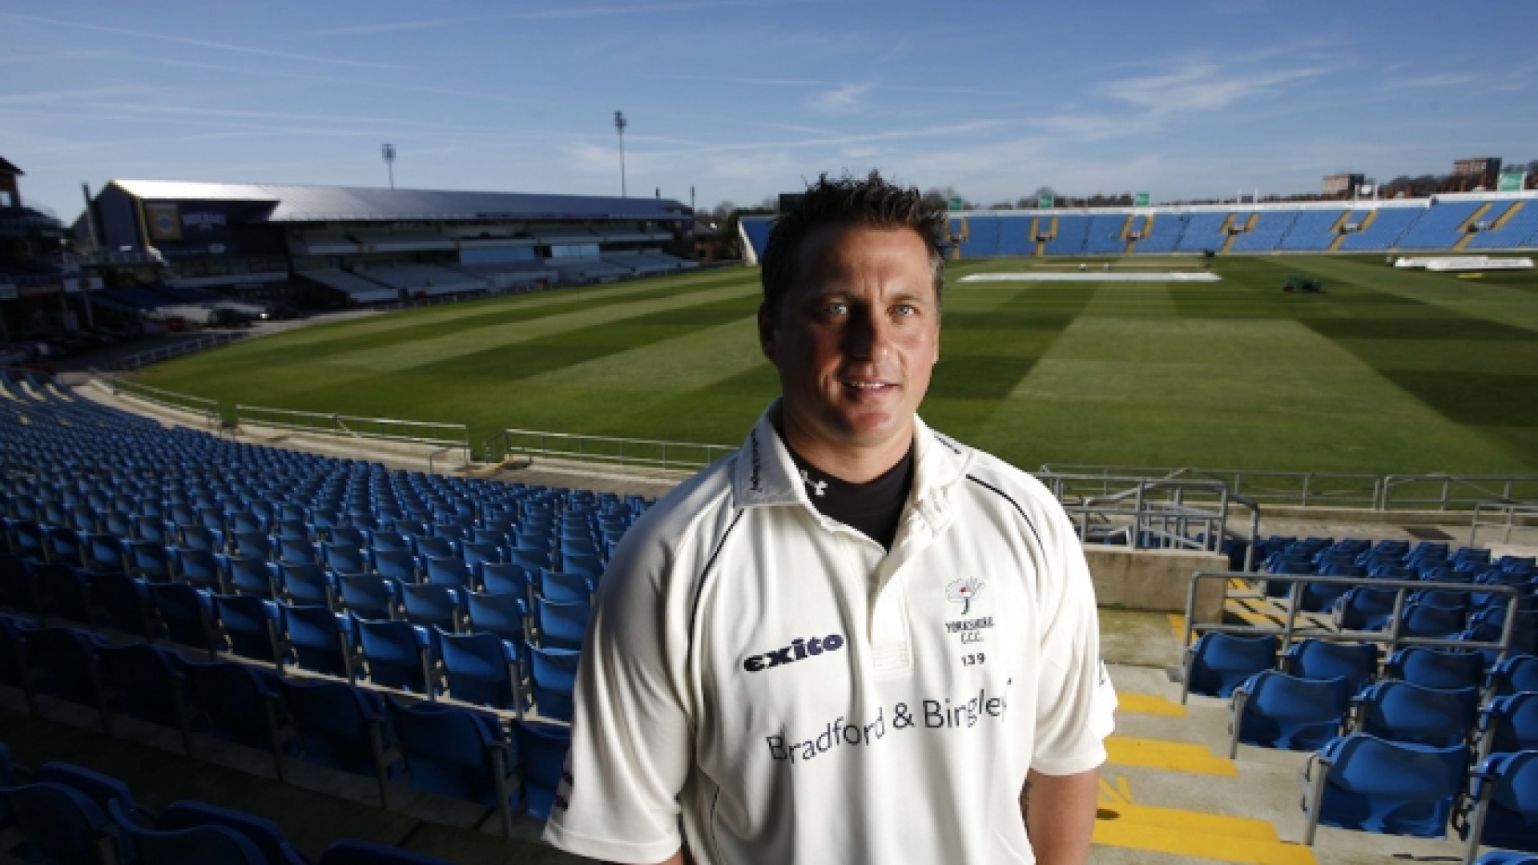 Yorkshire appoint new Managing Director as sacked support staff plan legal action against club